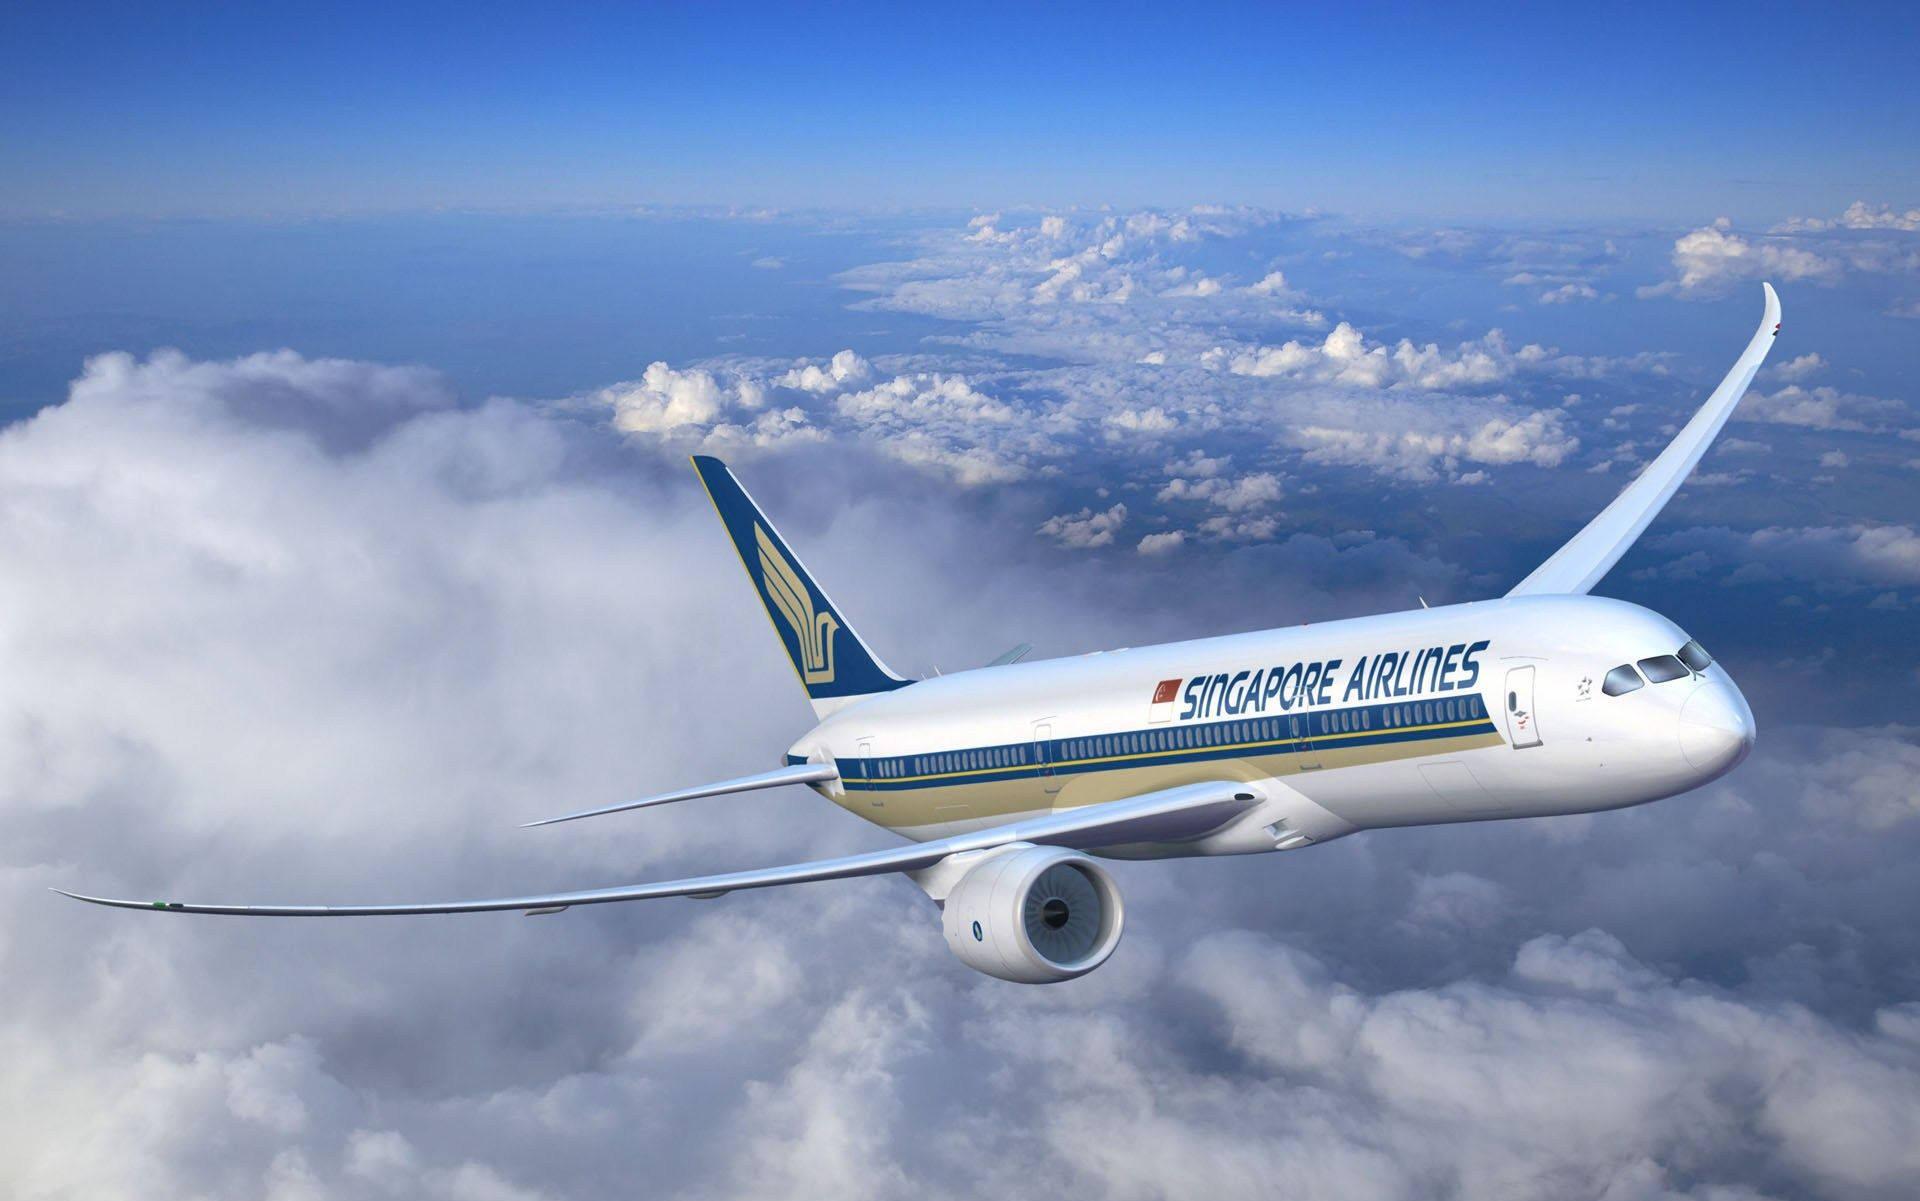 Singapore Airlines Wallpaper